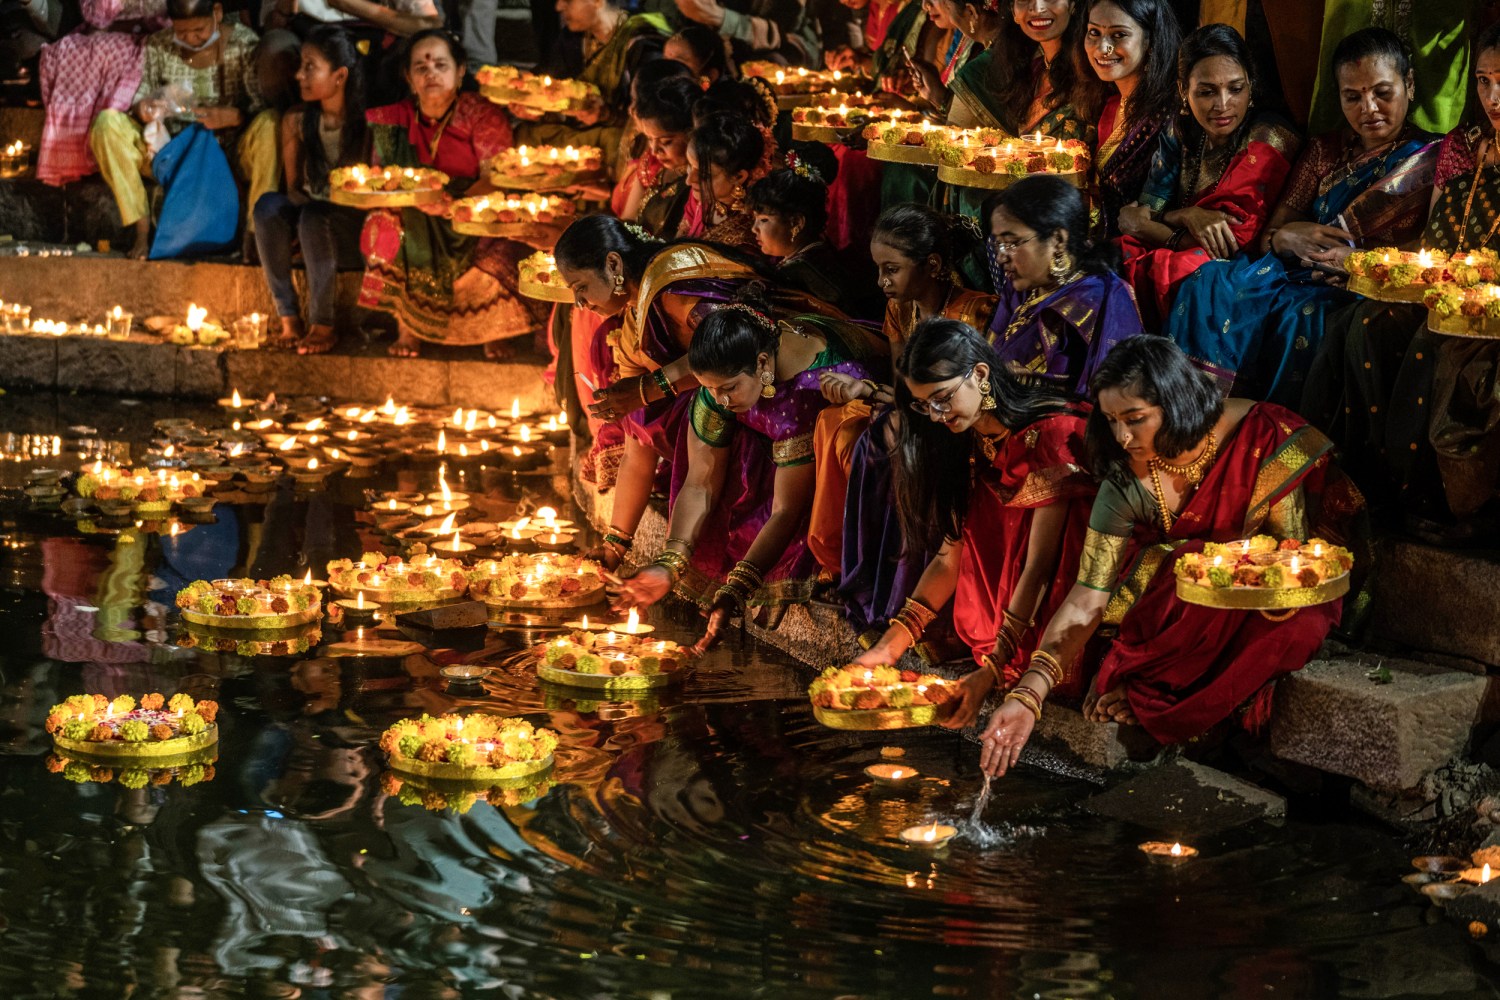 What is Diwali and how is it celebrated in India and the diaspora?